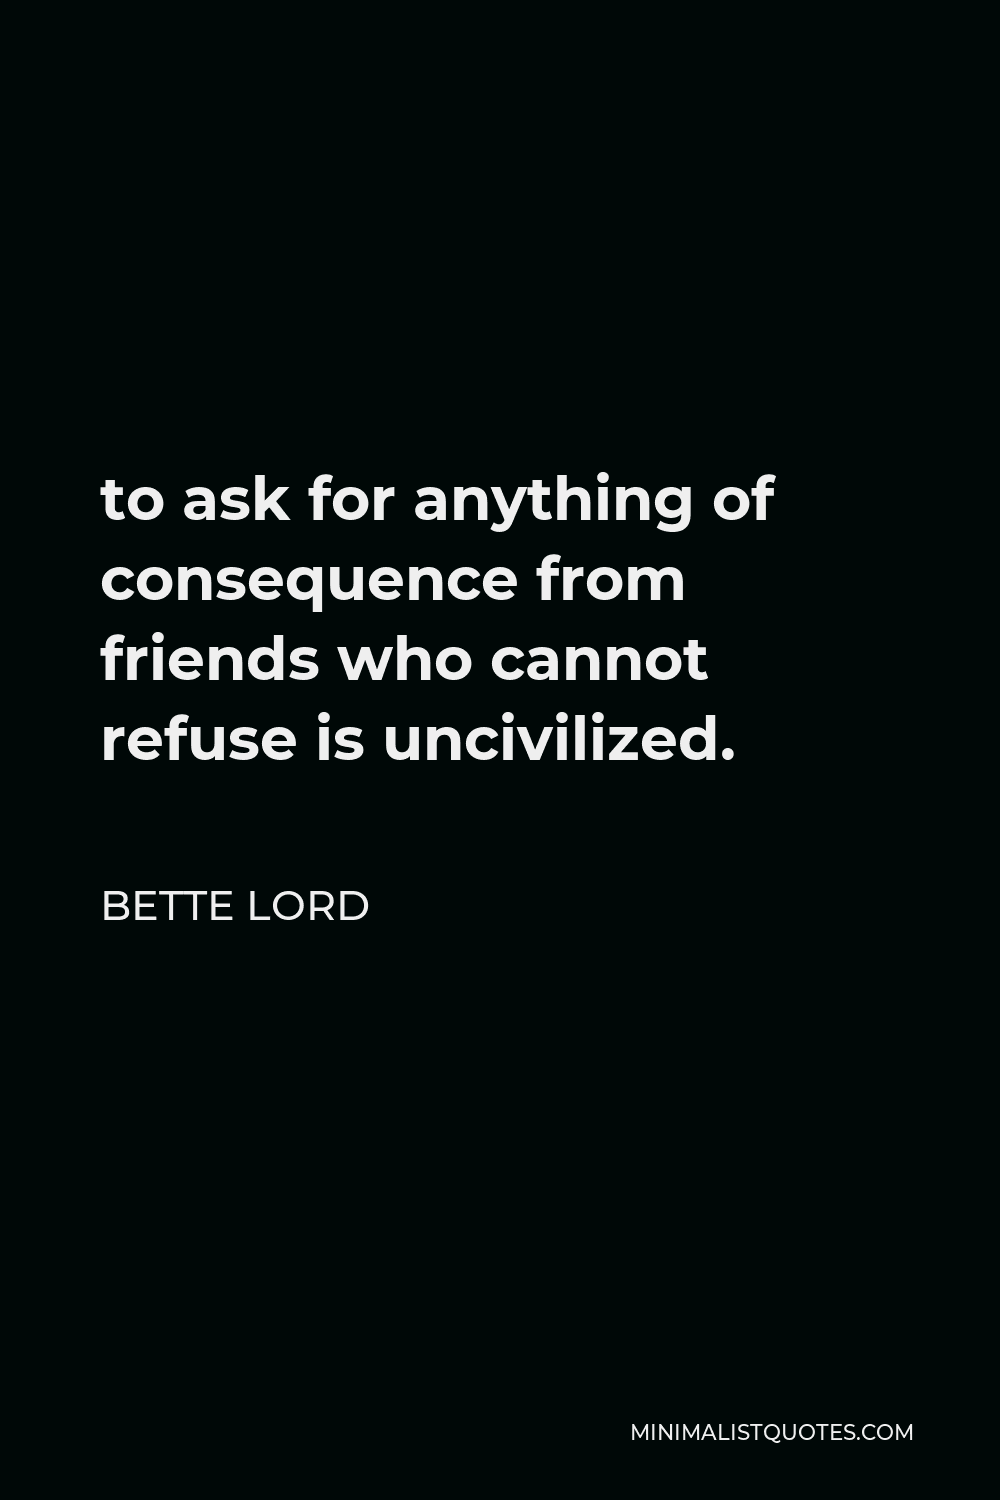 Bette Lord Quote - to ask for anything of consequence from friends who cannot refuse is uncivilized.